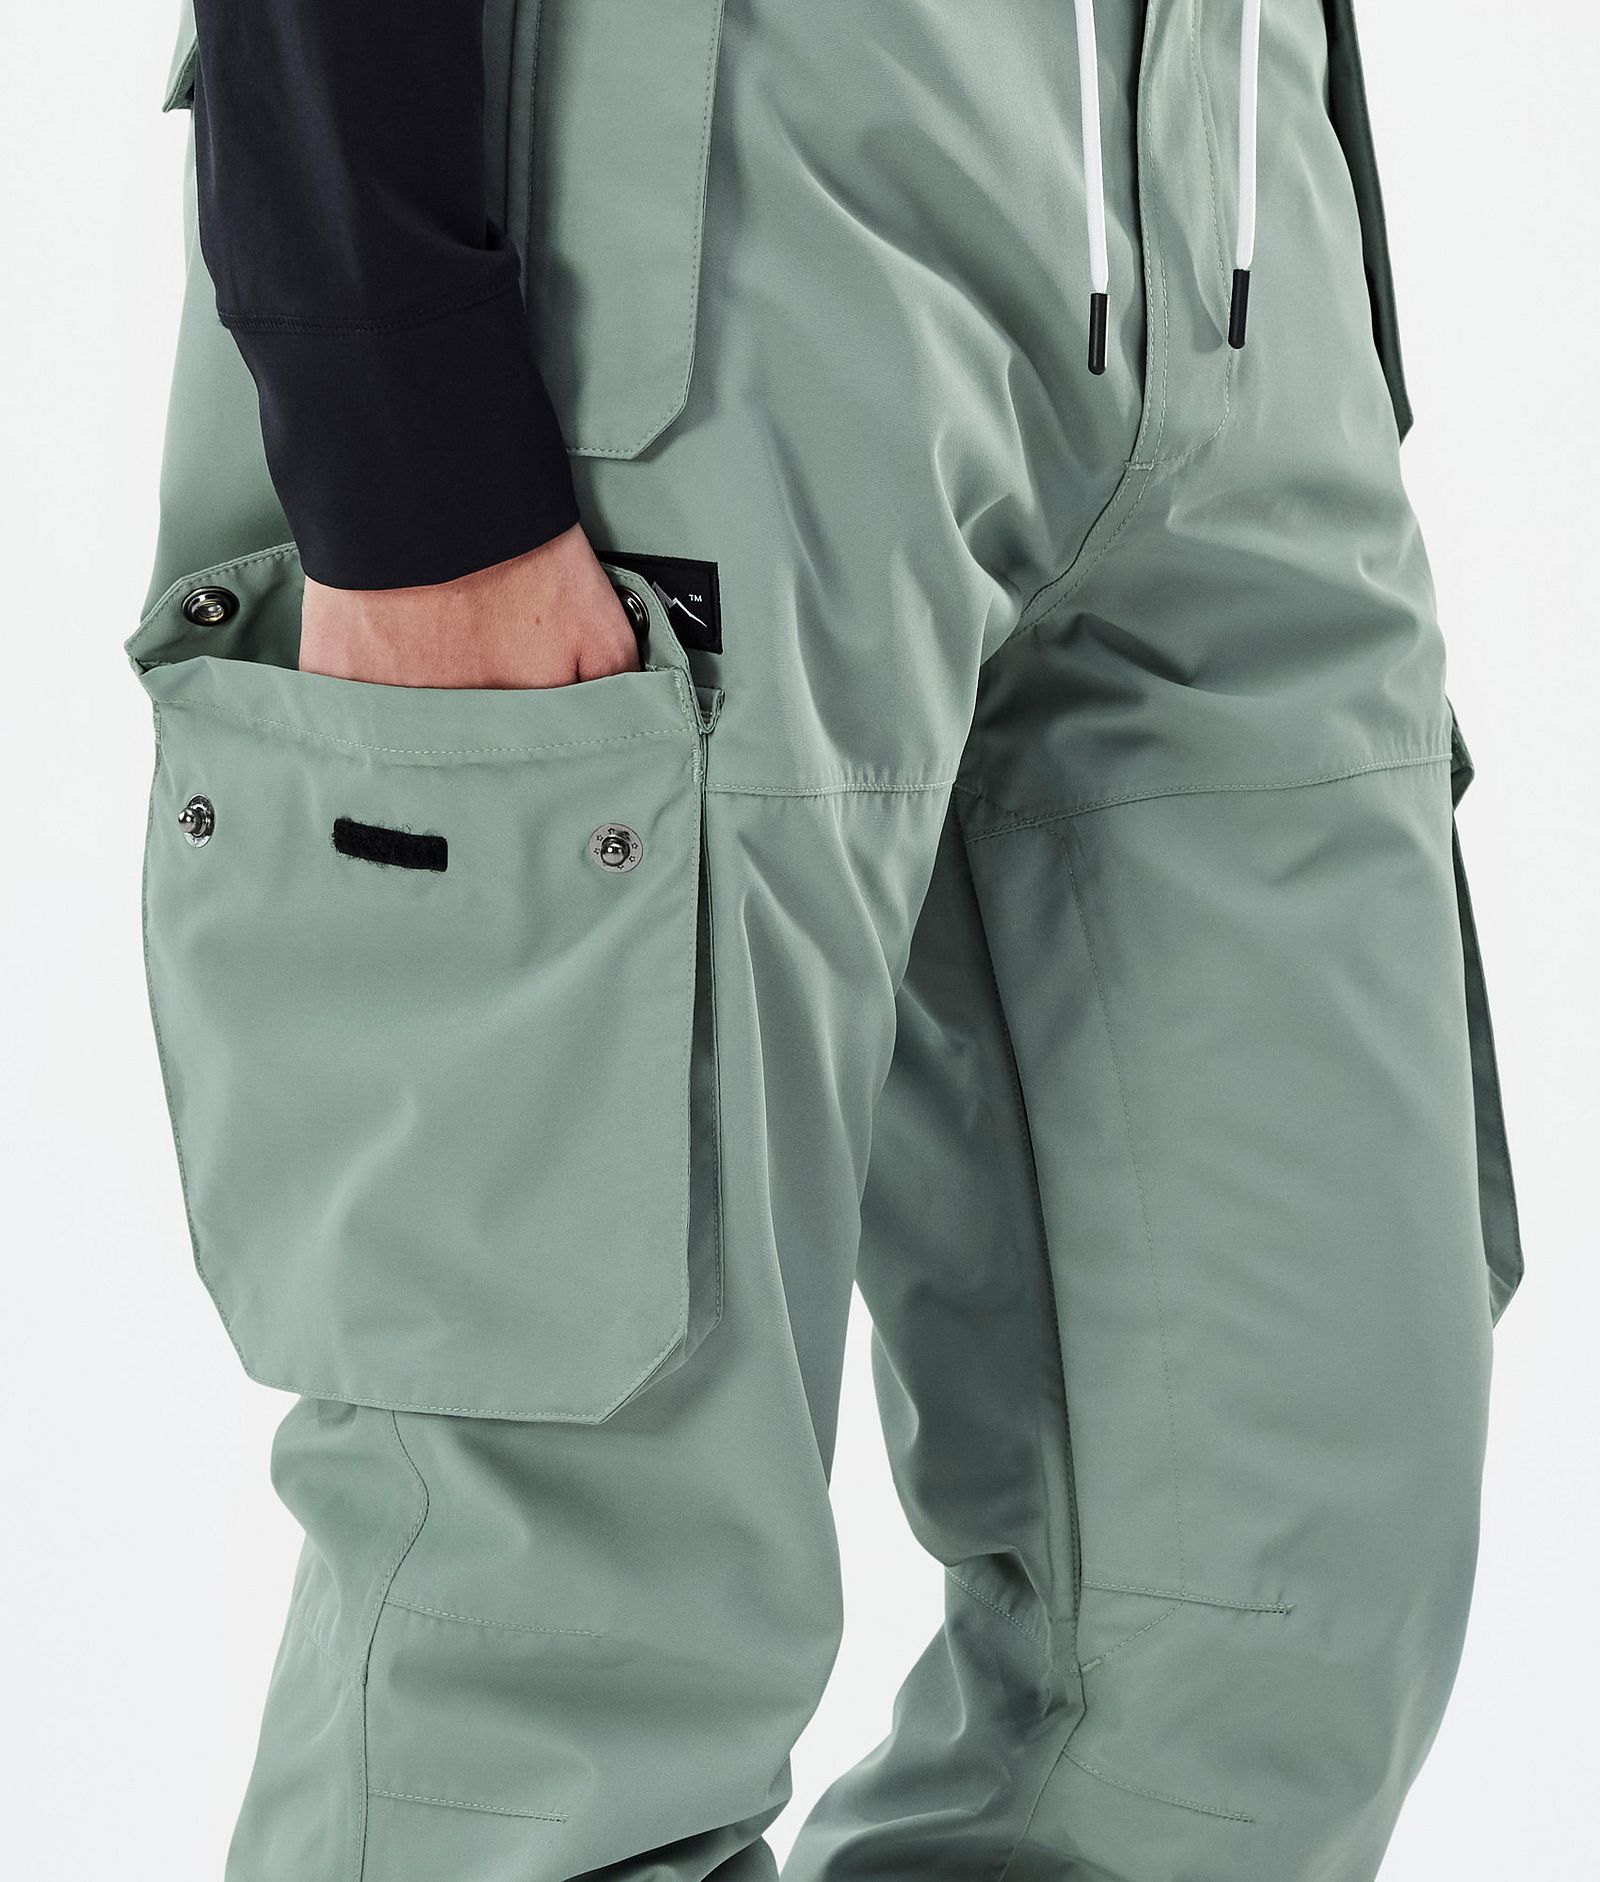 Iconic W Snowboard Pants Women Faded Green, Image 6 of 7